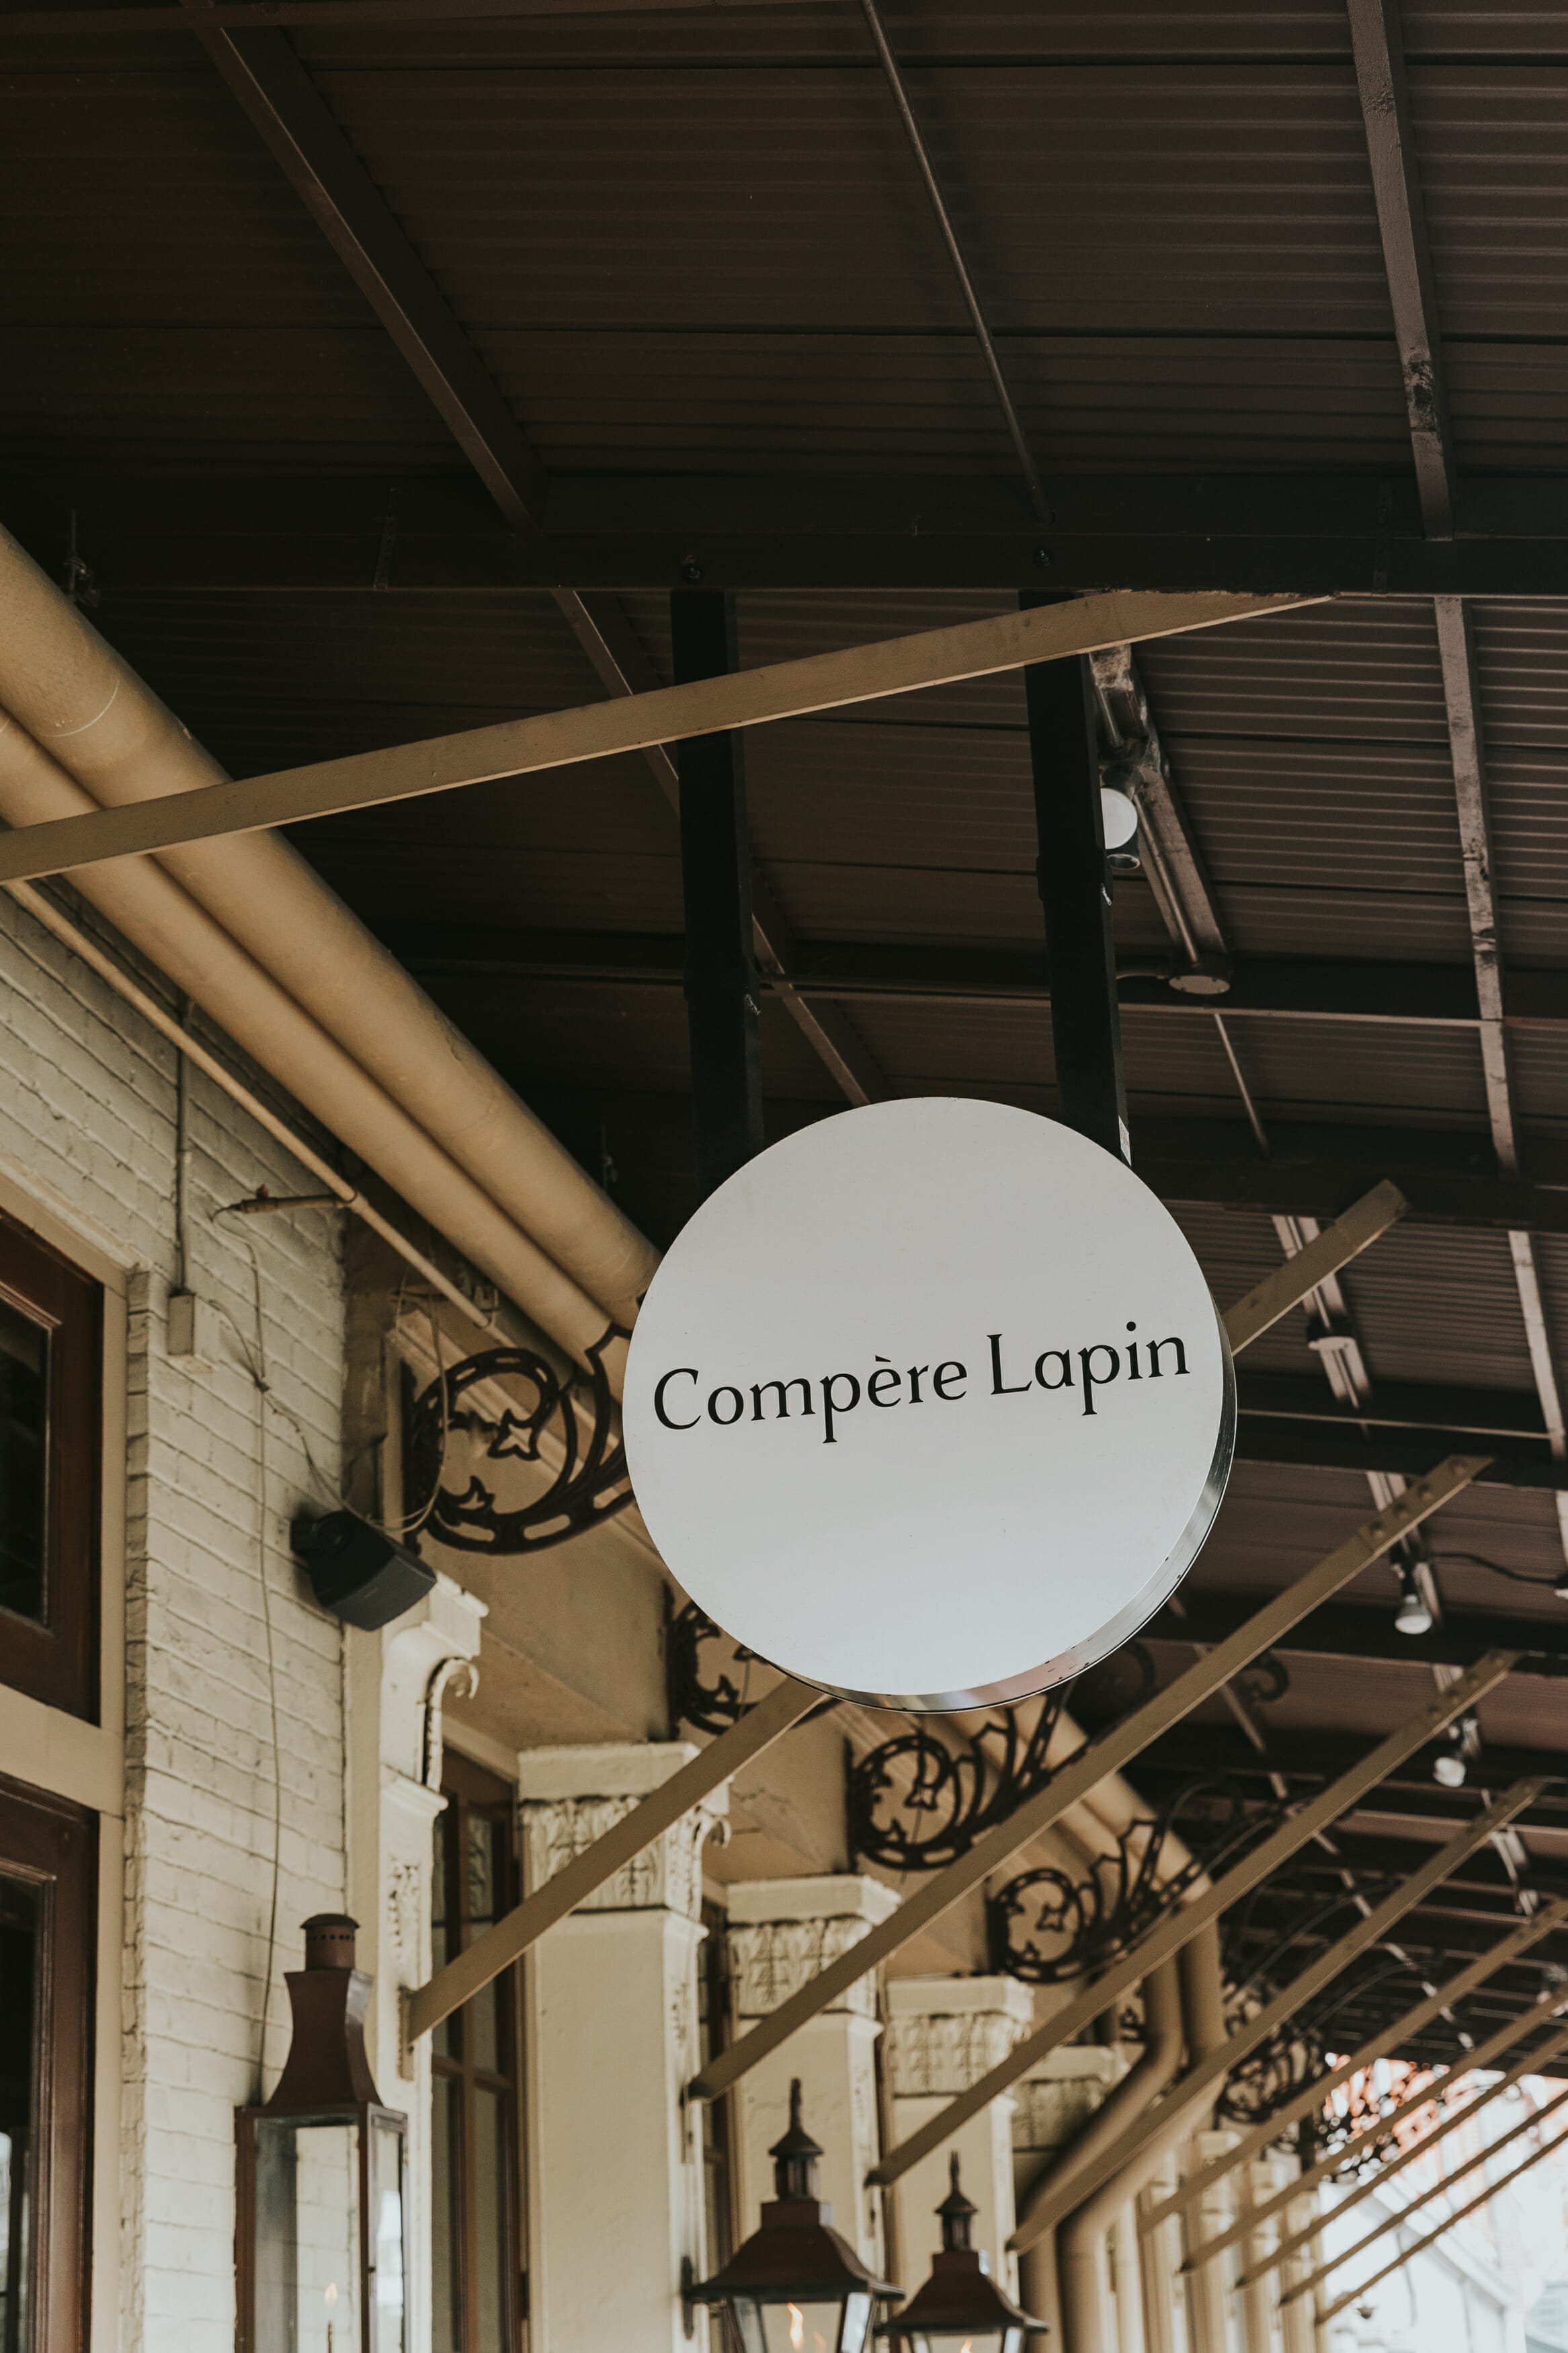 compere lapin restaurant sign